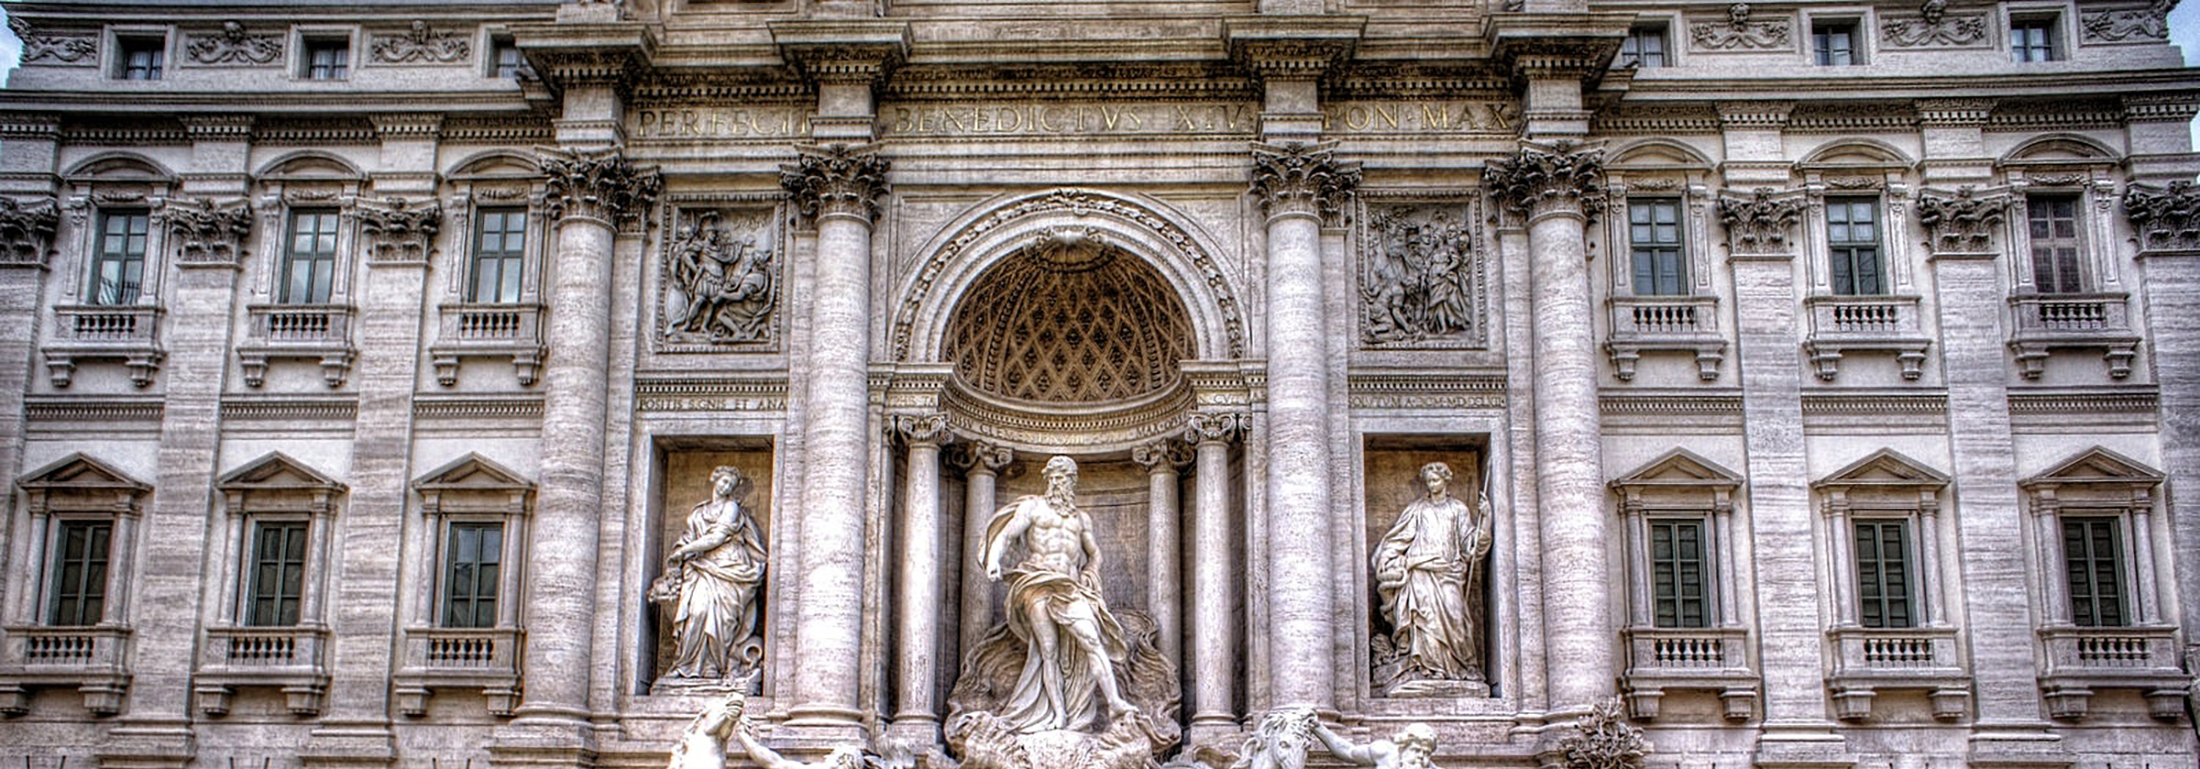 Street view of the Trevi Fountain in Rome, Italy